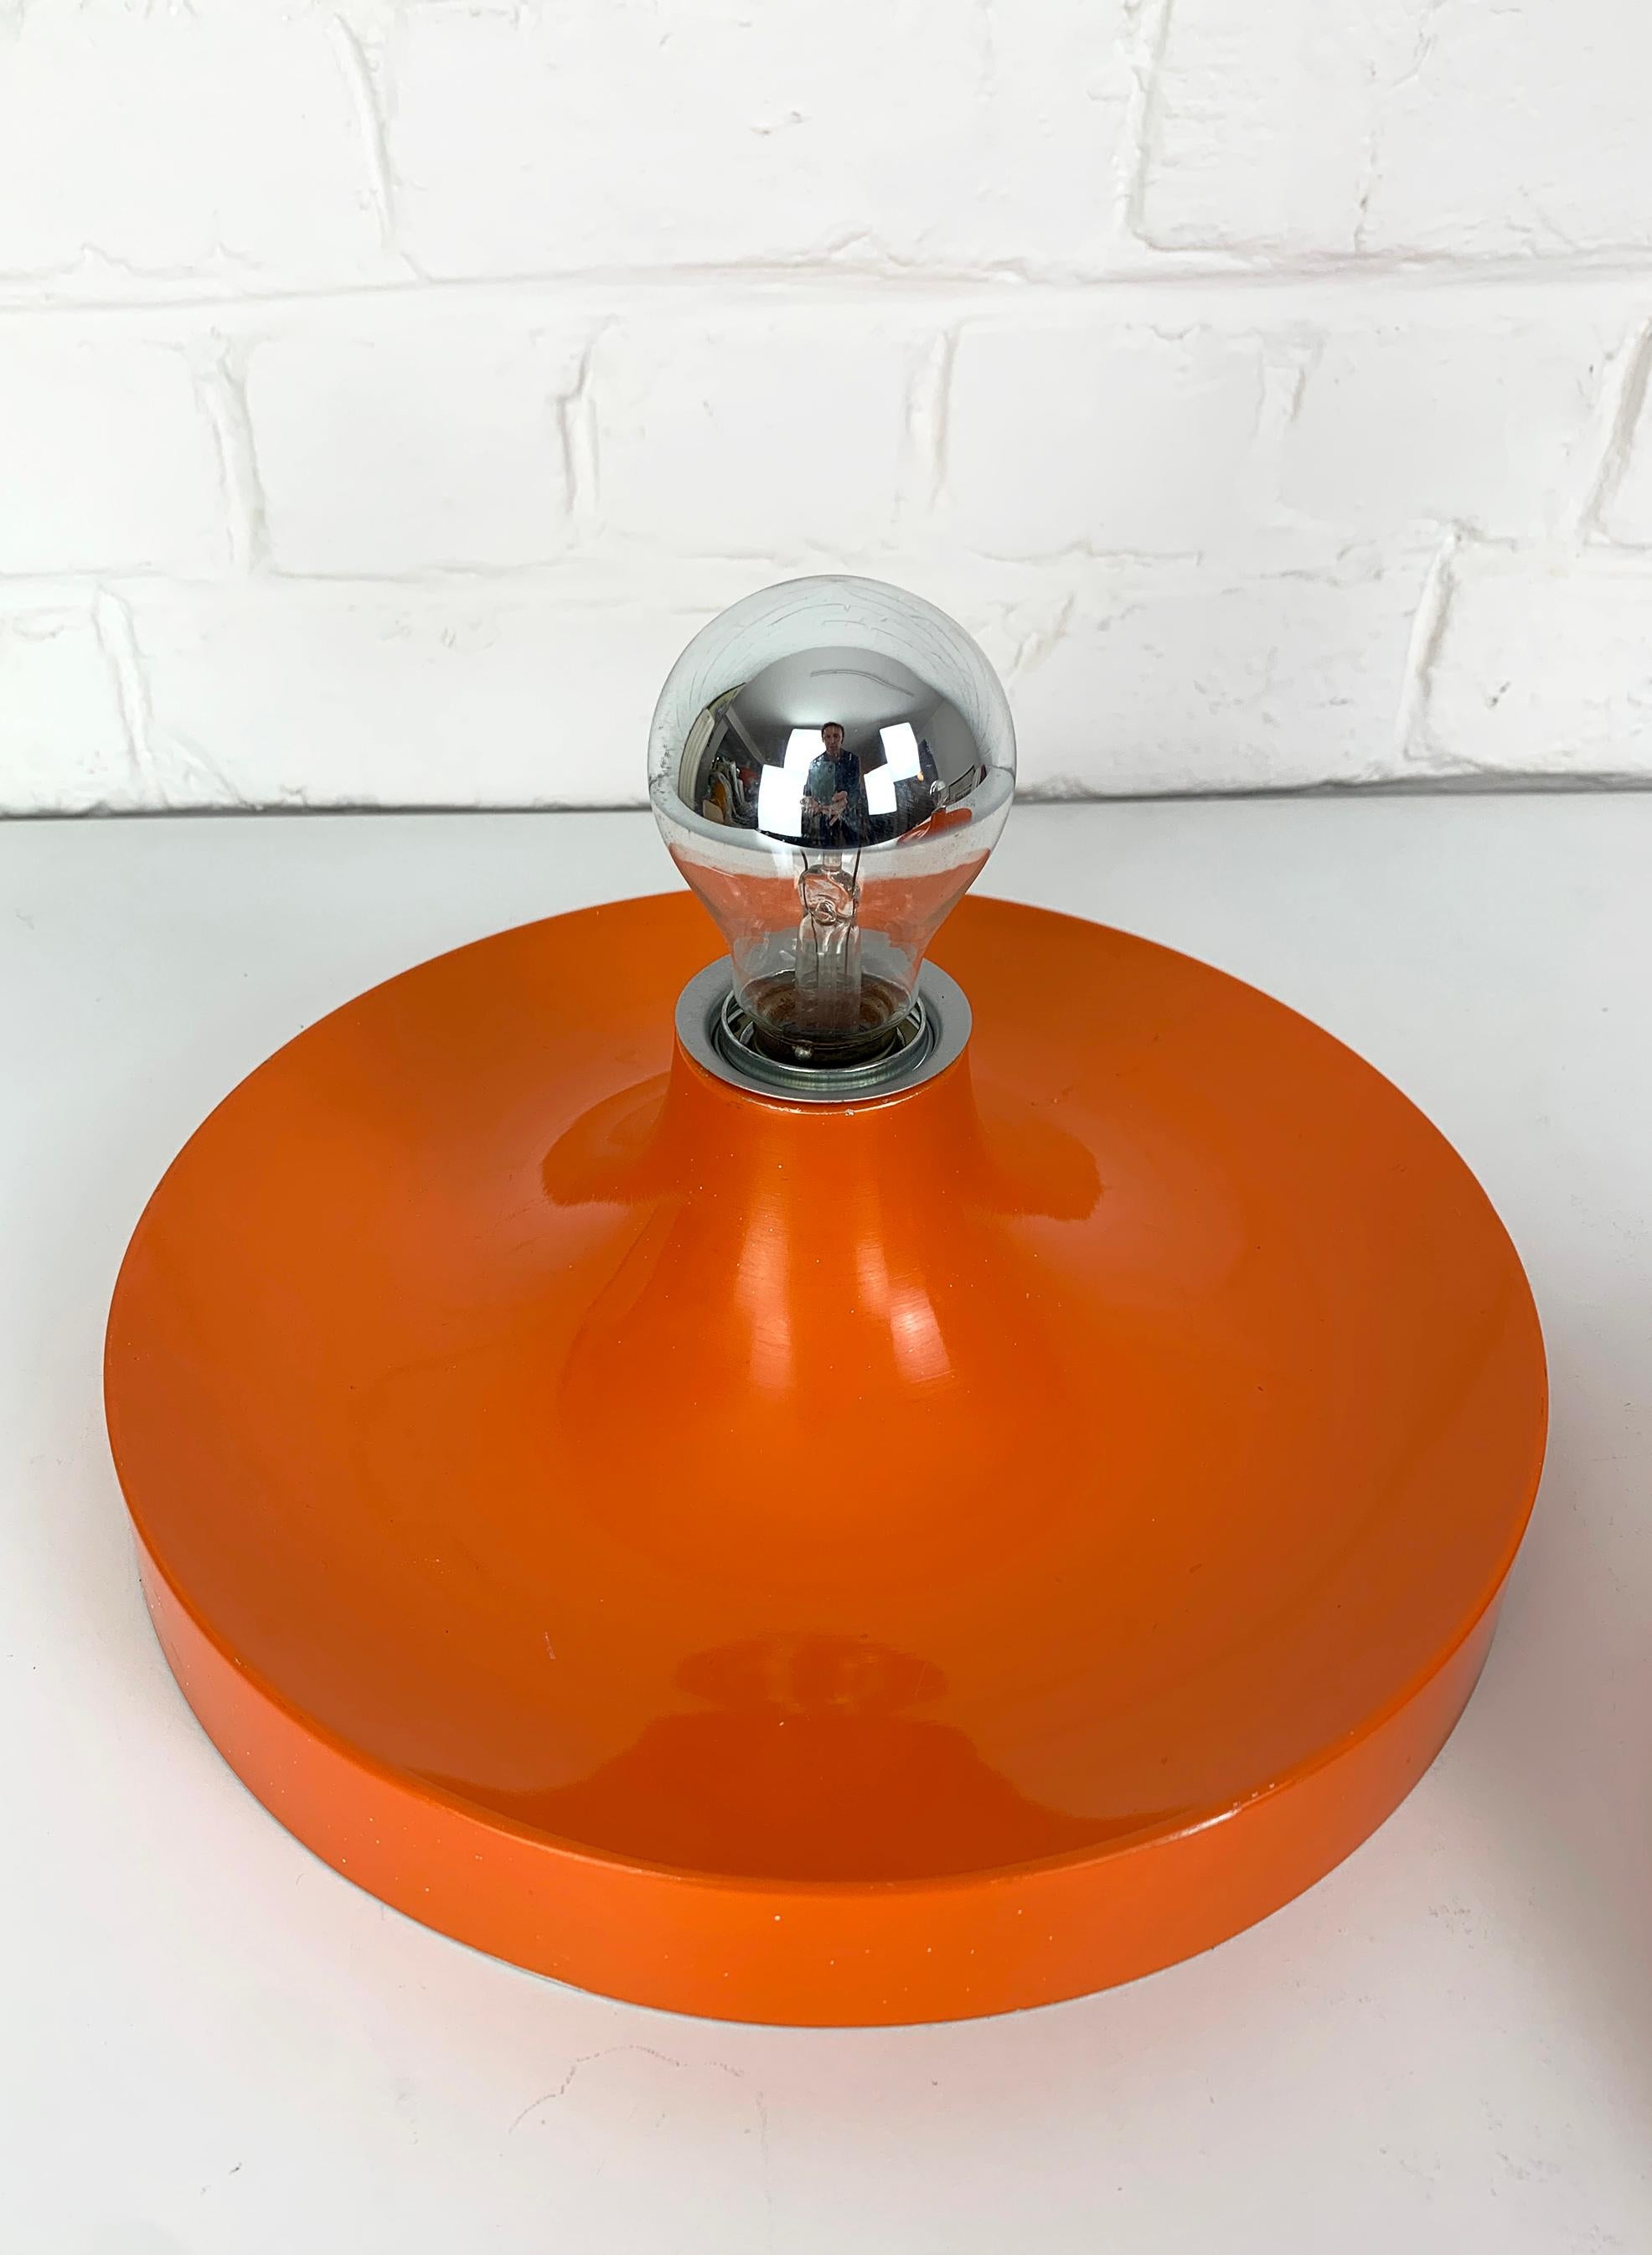 Aluminum Pair Charlotte Perriand Space Age Flush Sconce Disc Wall Light, Germany, 1960s For Sale